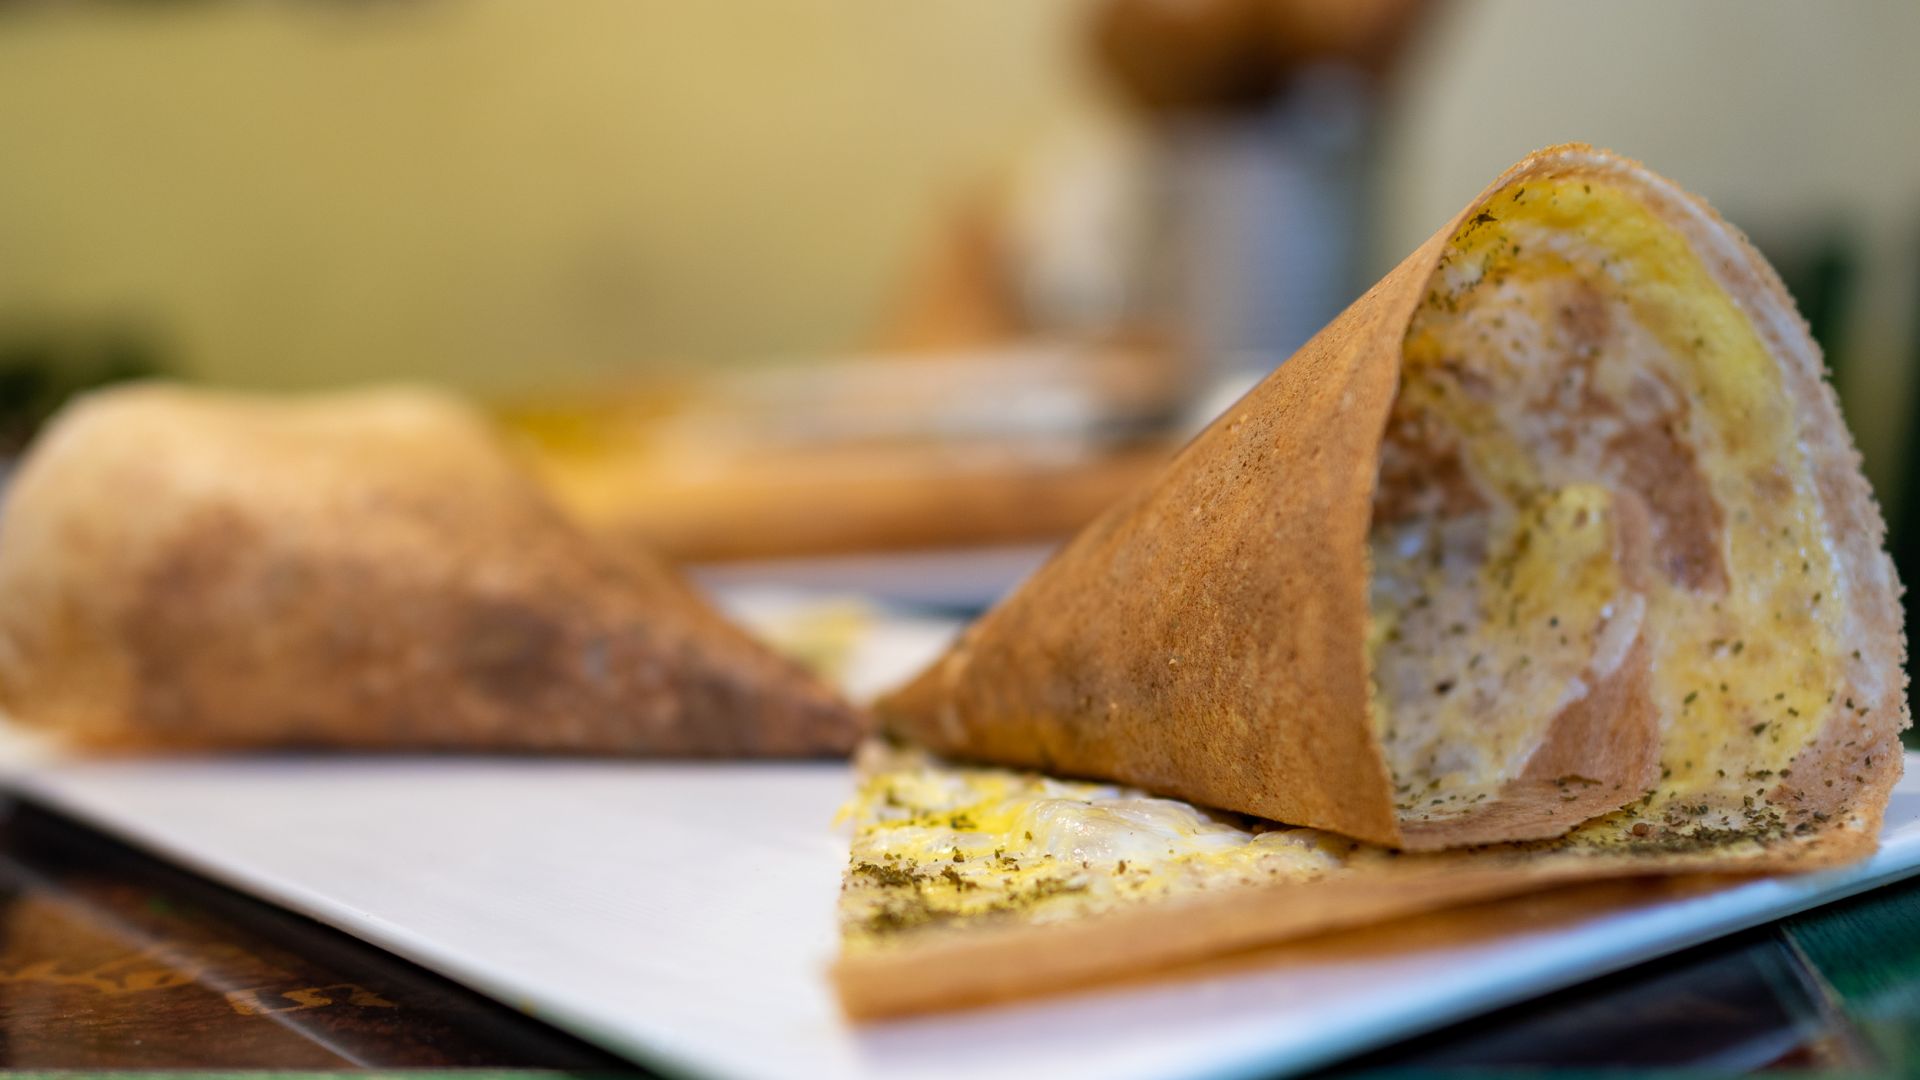 In focus is one half of a double cone of crisp regag bread. We can see the thin egg filling and a sprinkle of green zaatar